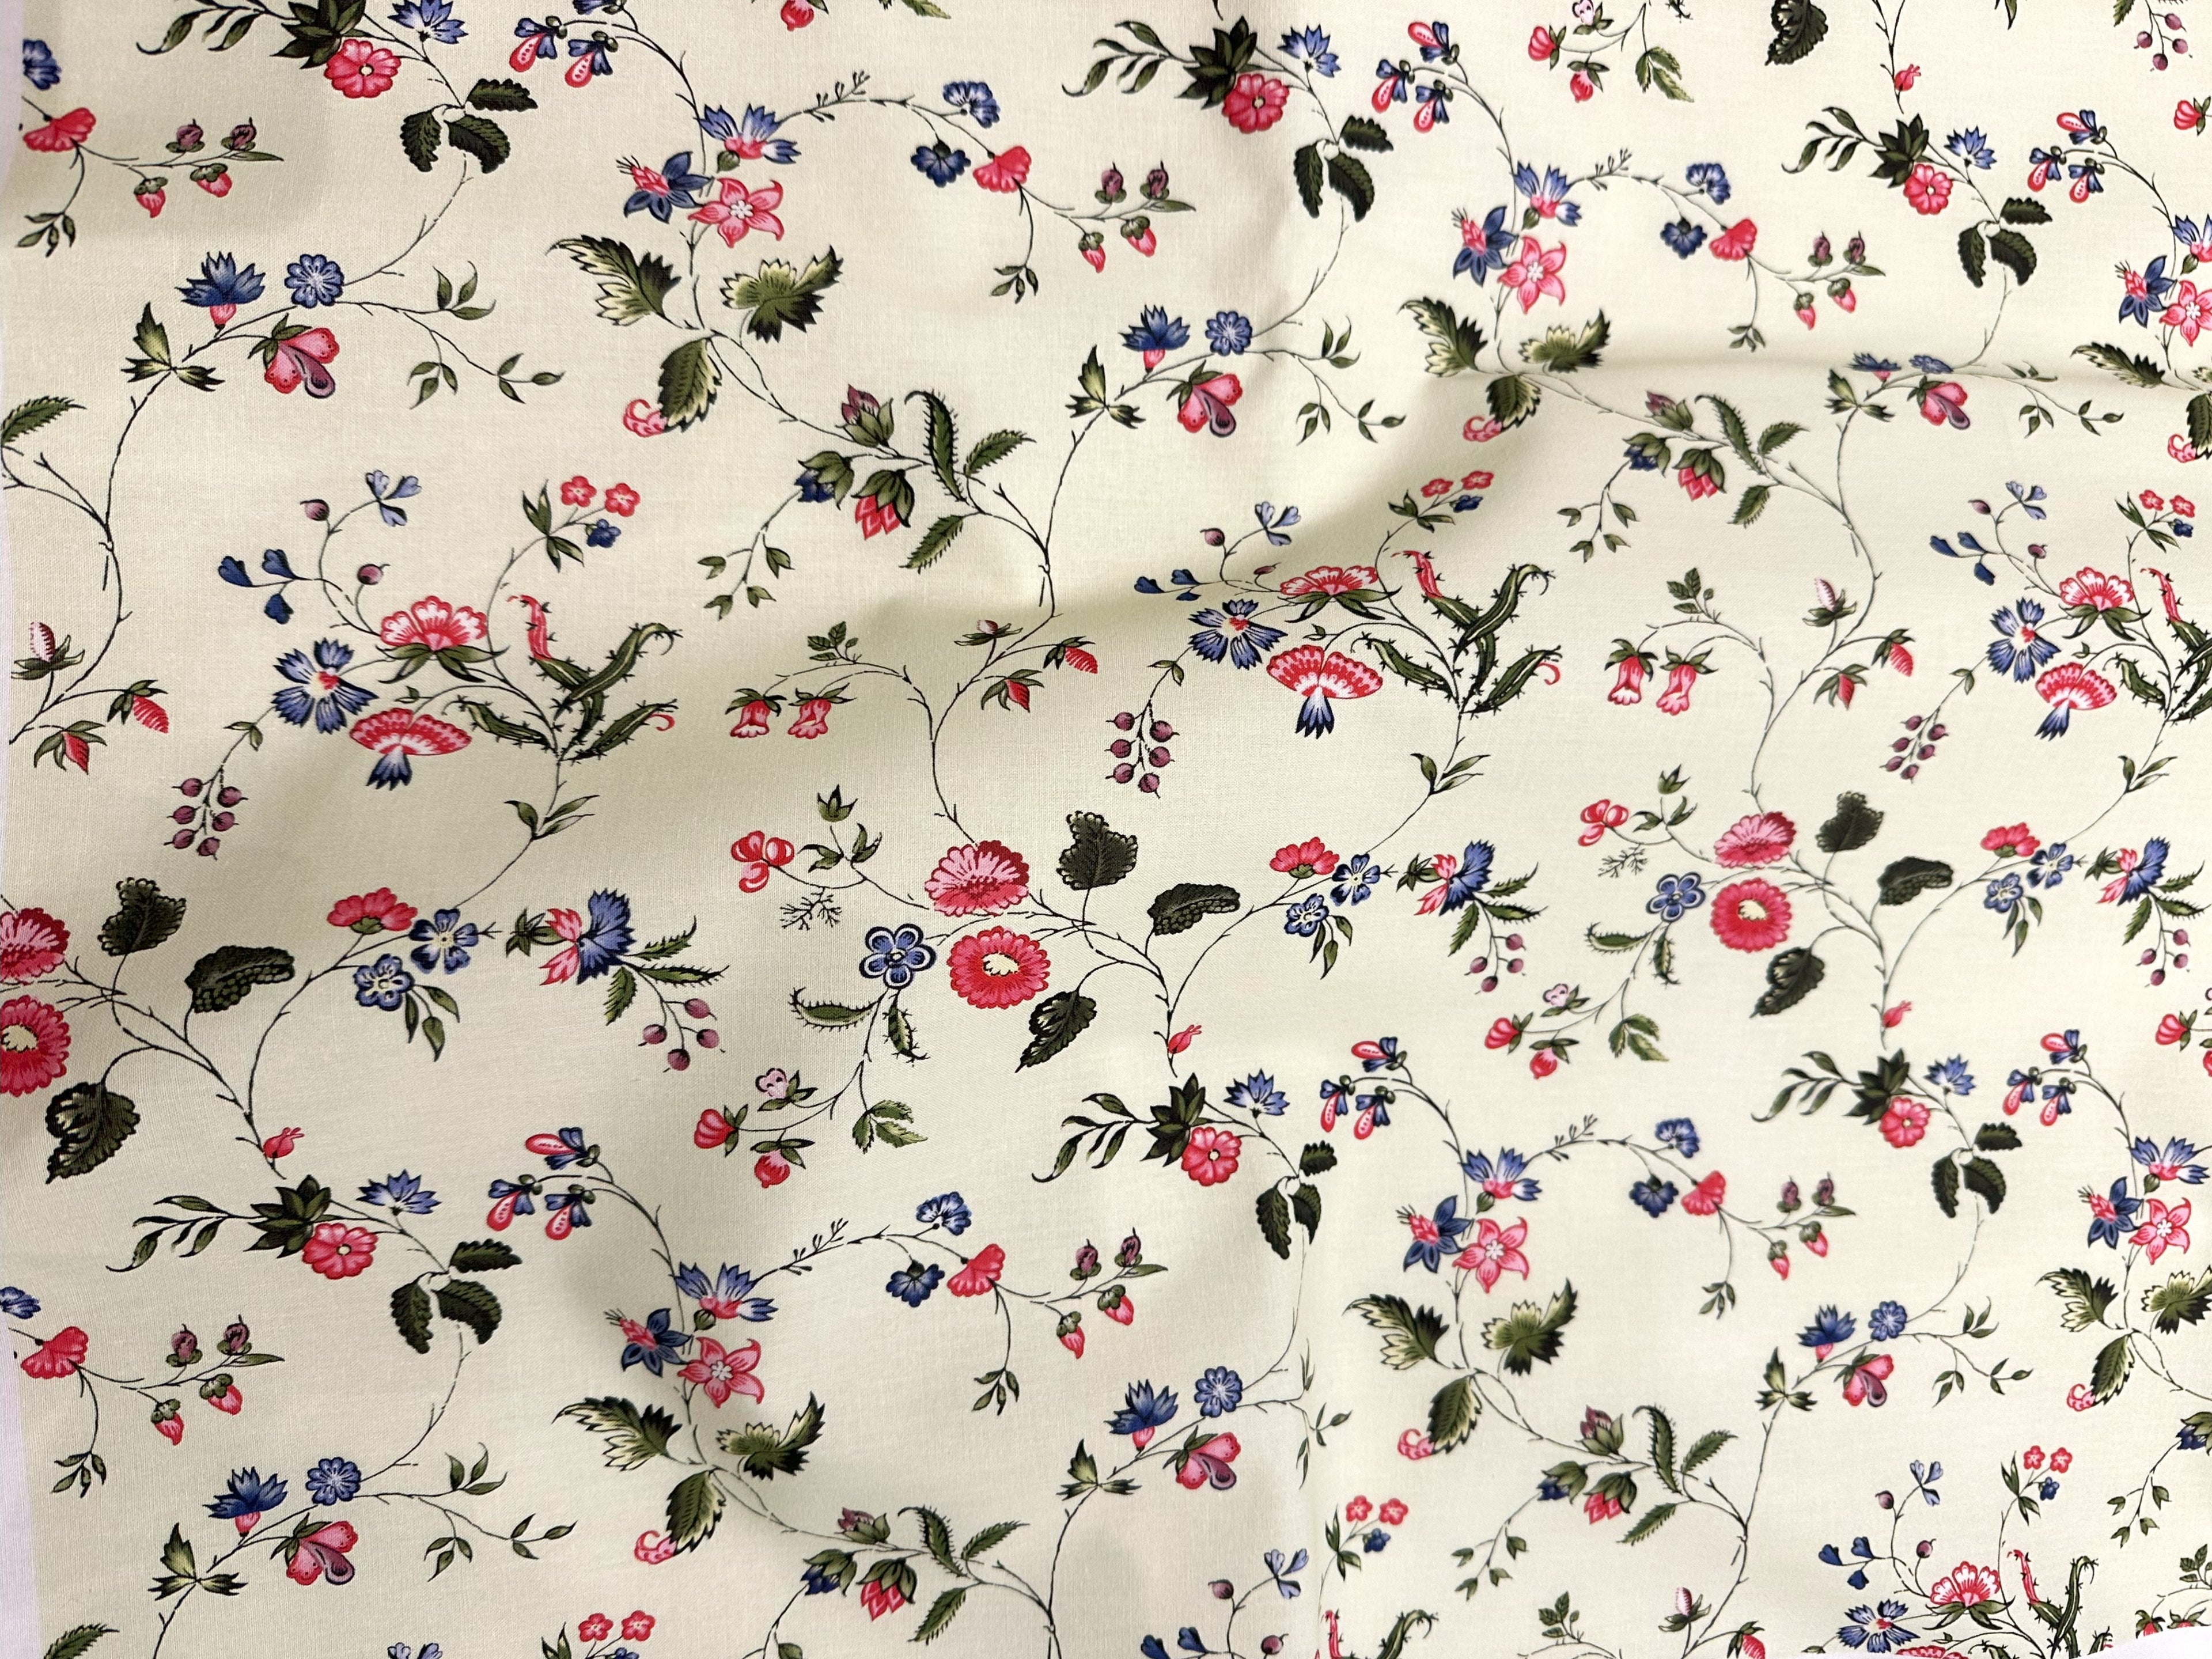 18th century fabric with flowers